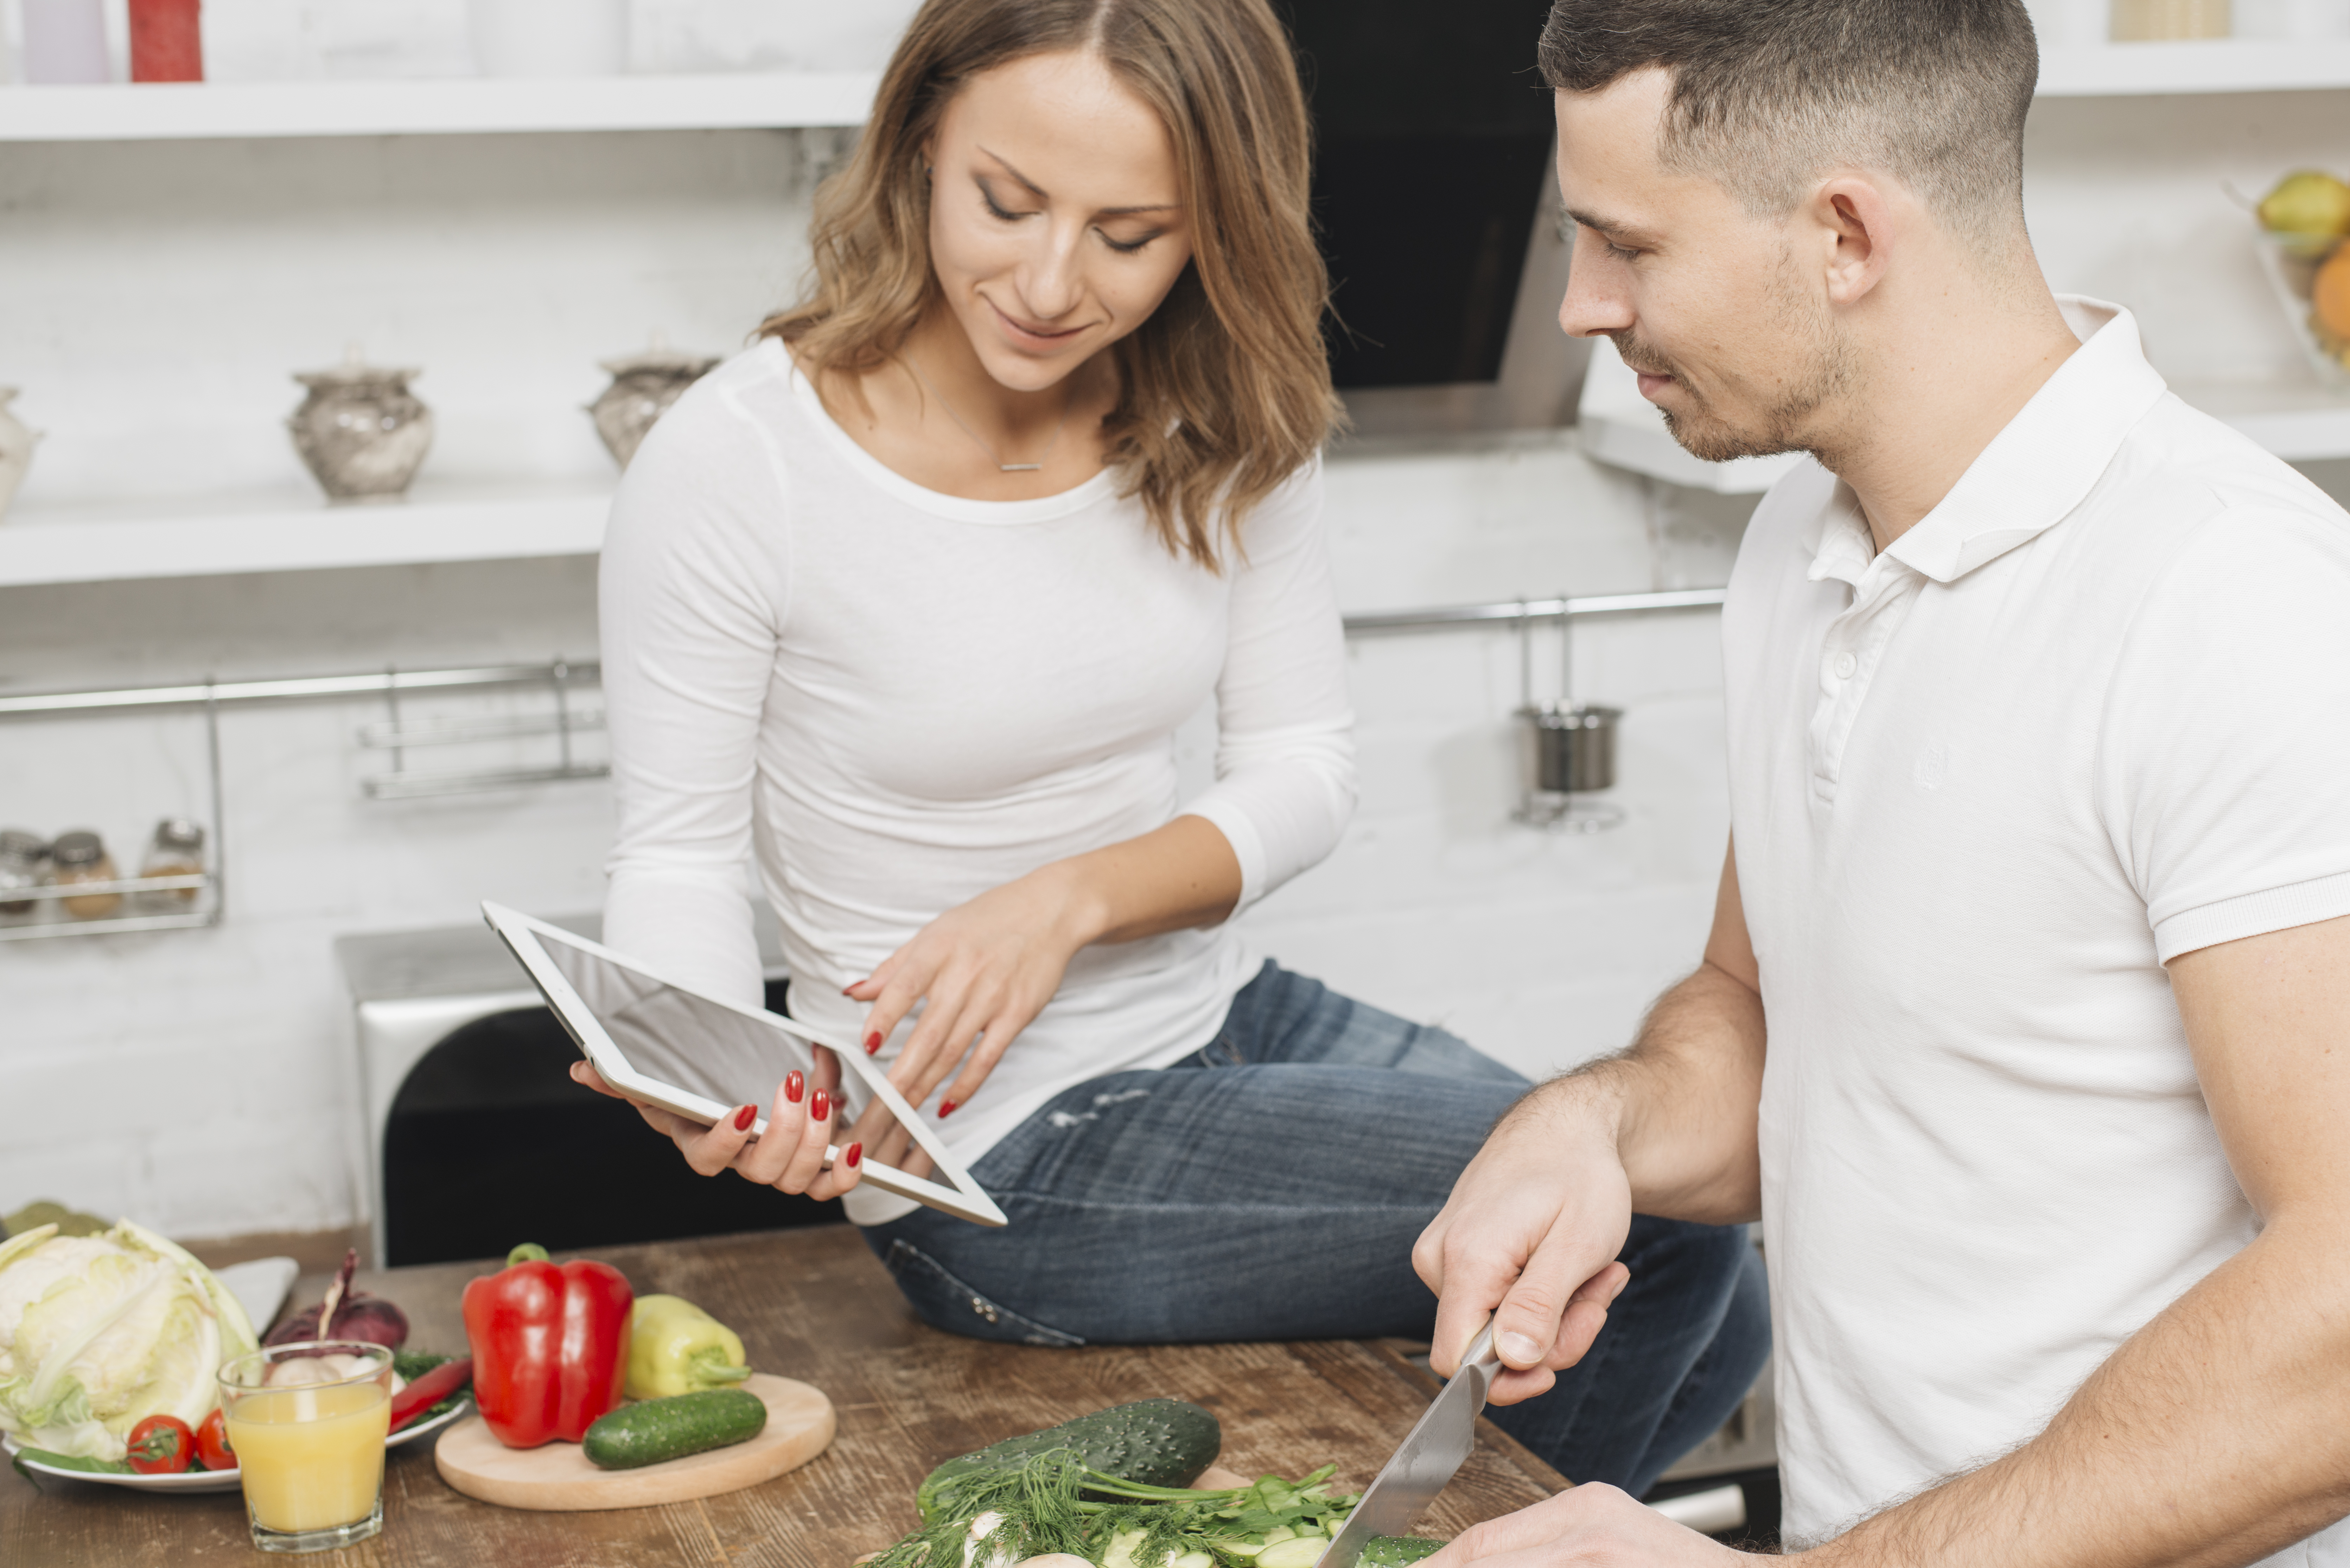 Woman showing a tablet to a man while cooking in the kitchen | Source: Freepik